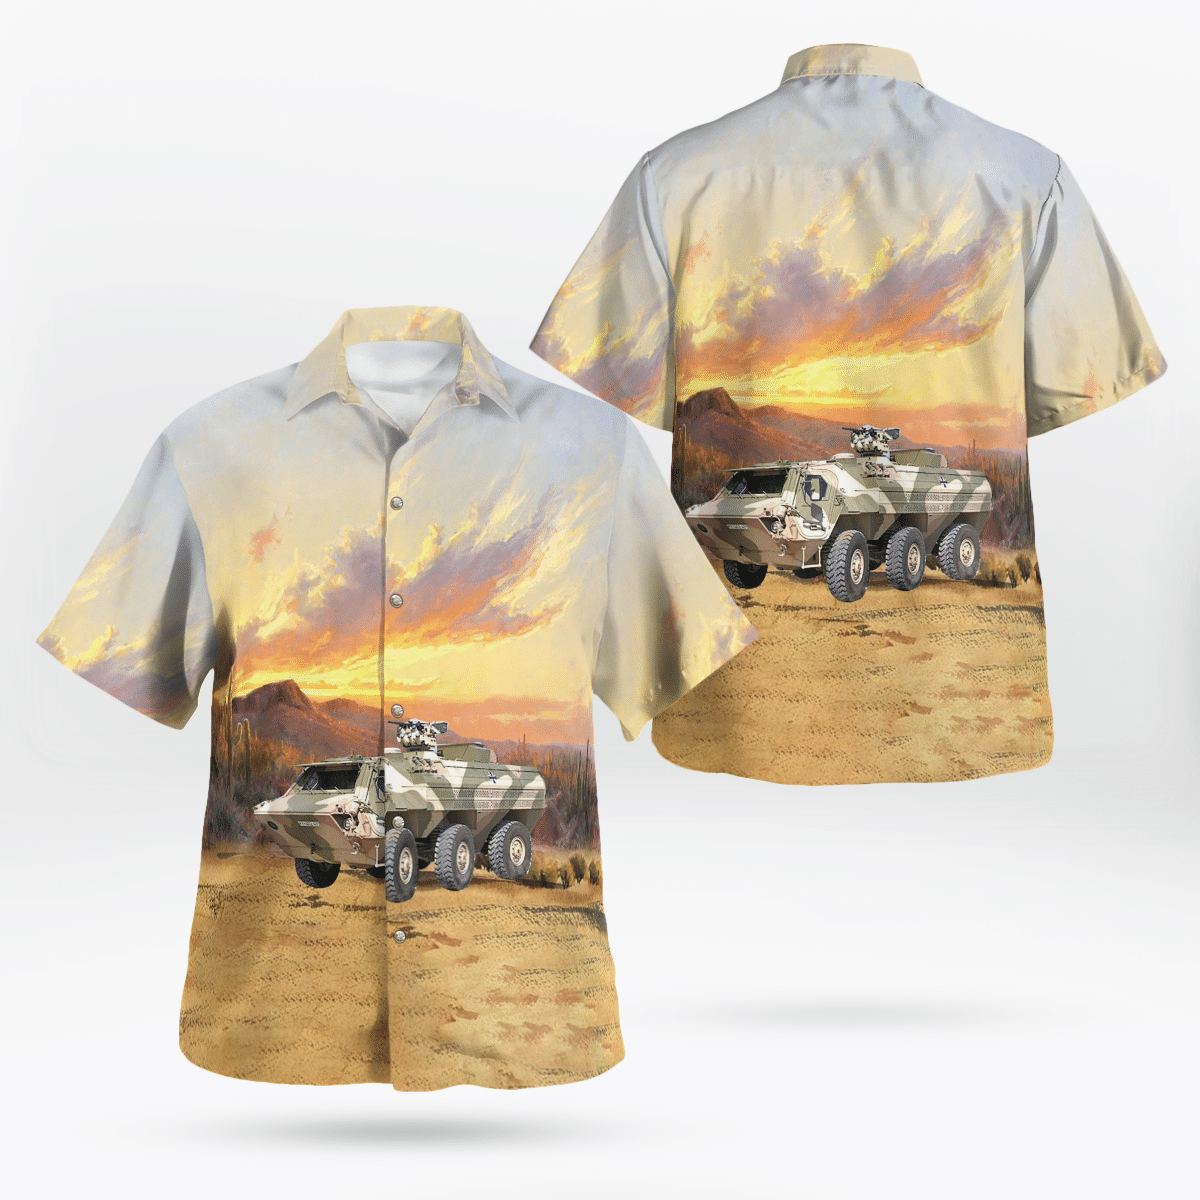 Shop now to find the perfect Hawaii Shirt for your hobby 156